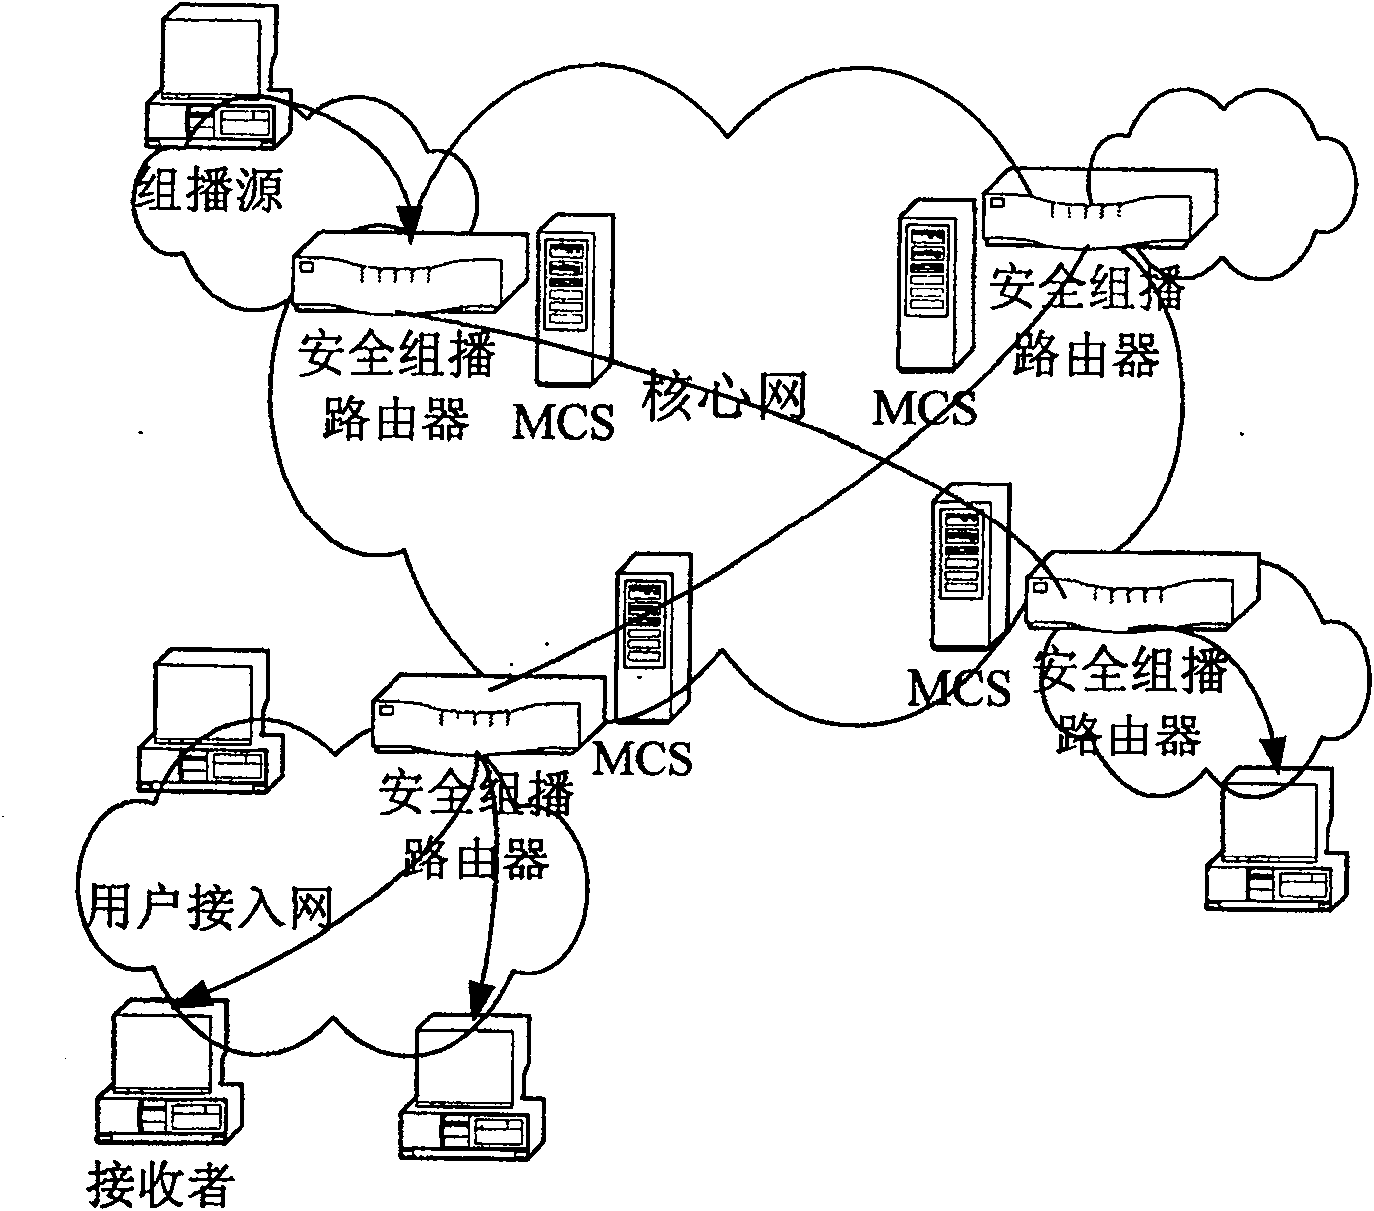 Safety multicast method based on protocol of conversation initialization